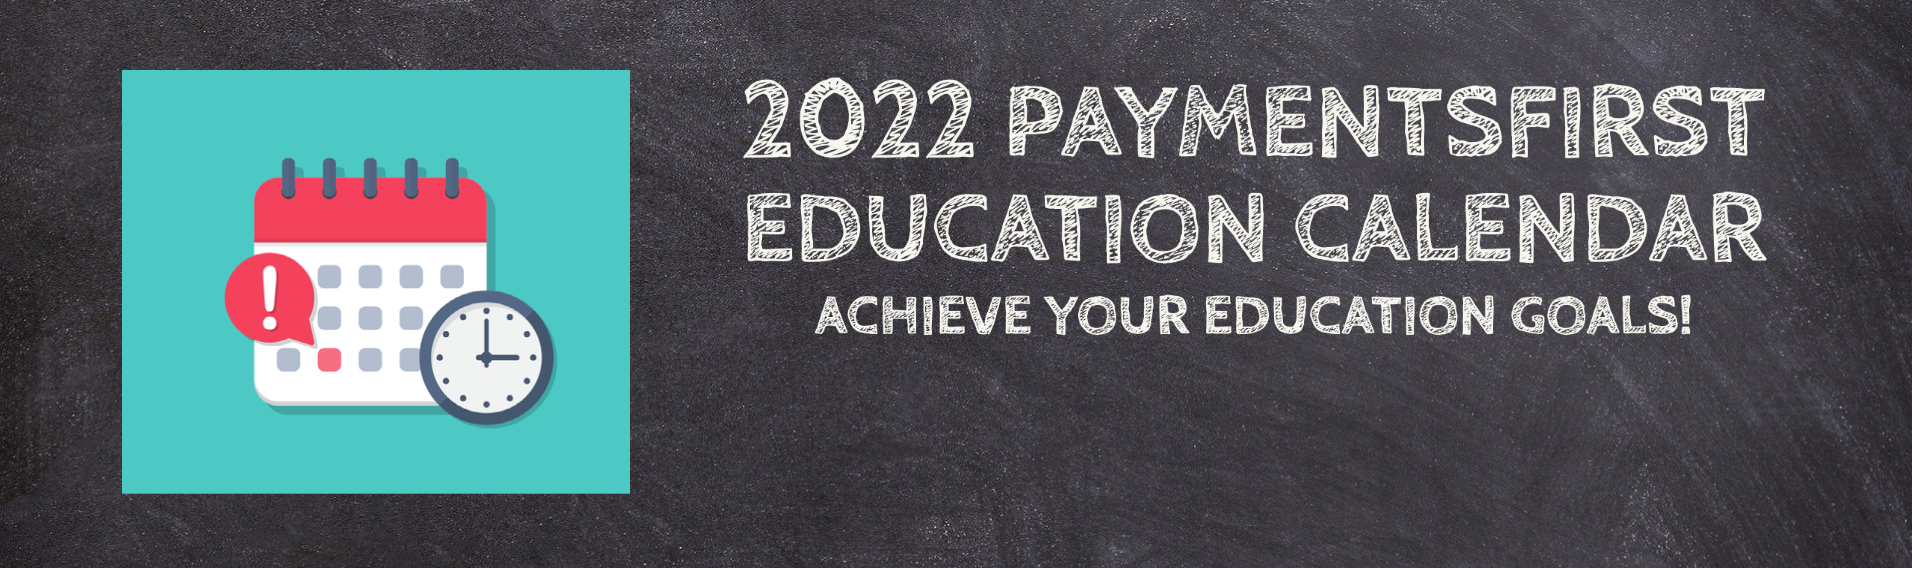 2022 PaymentsFirst Education Calendar Available Now!